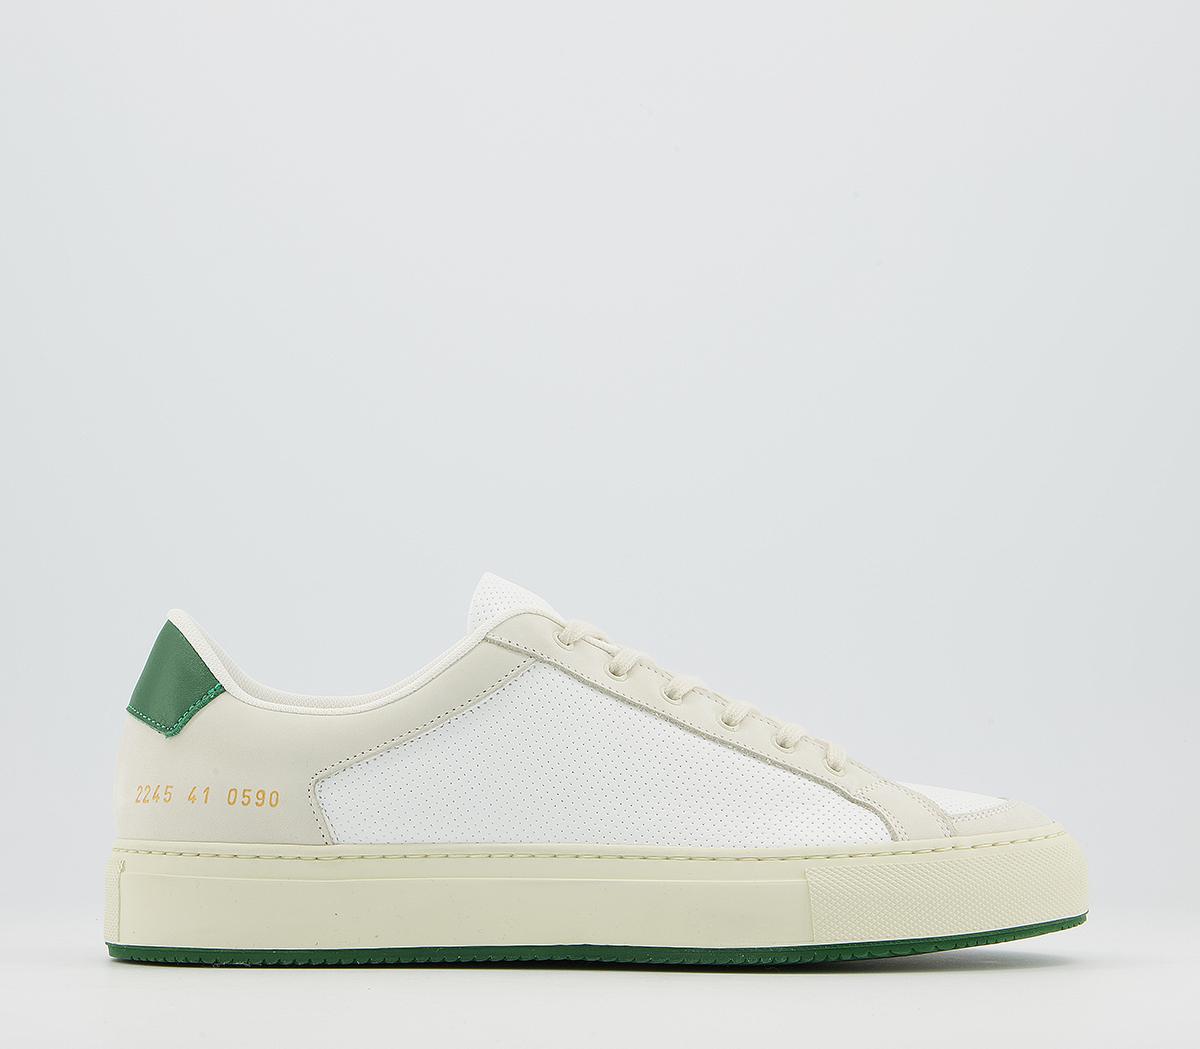 Common ProjectsRetro Low 70s Article TrainersWhite Green